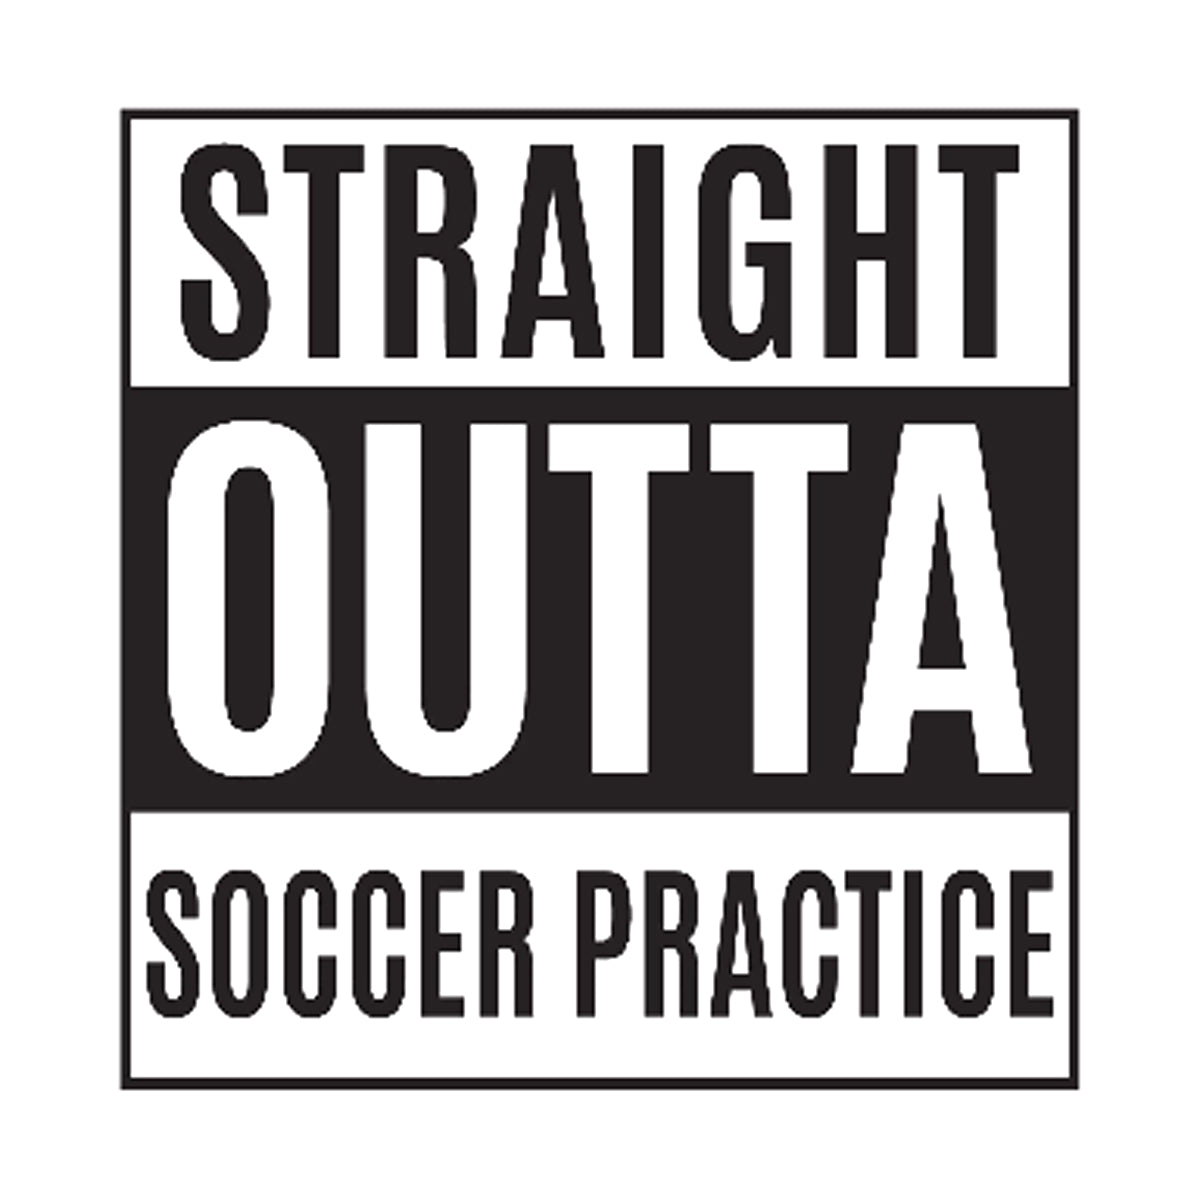 Straight Outta Soccer Practice Printed Tee Humorous Shirt 411 